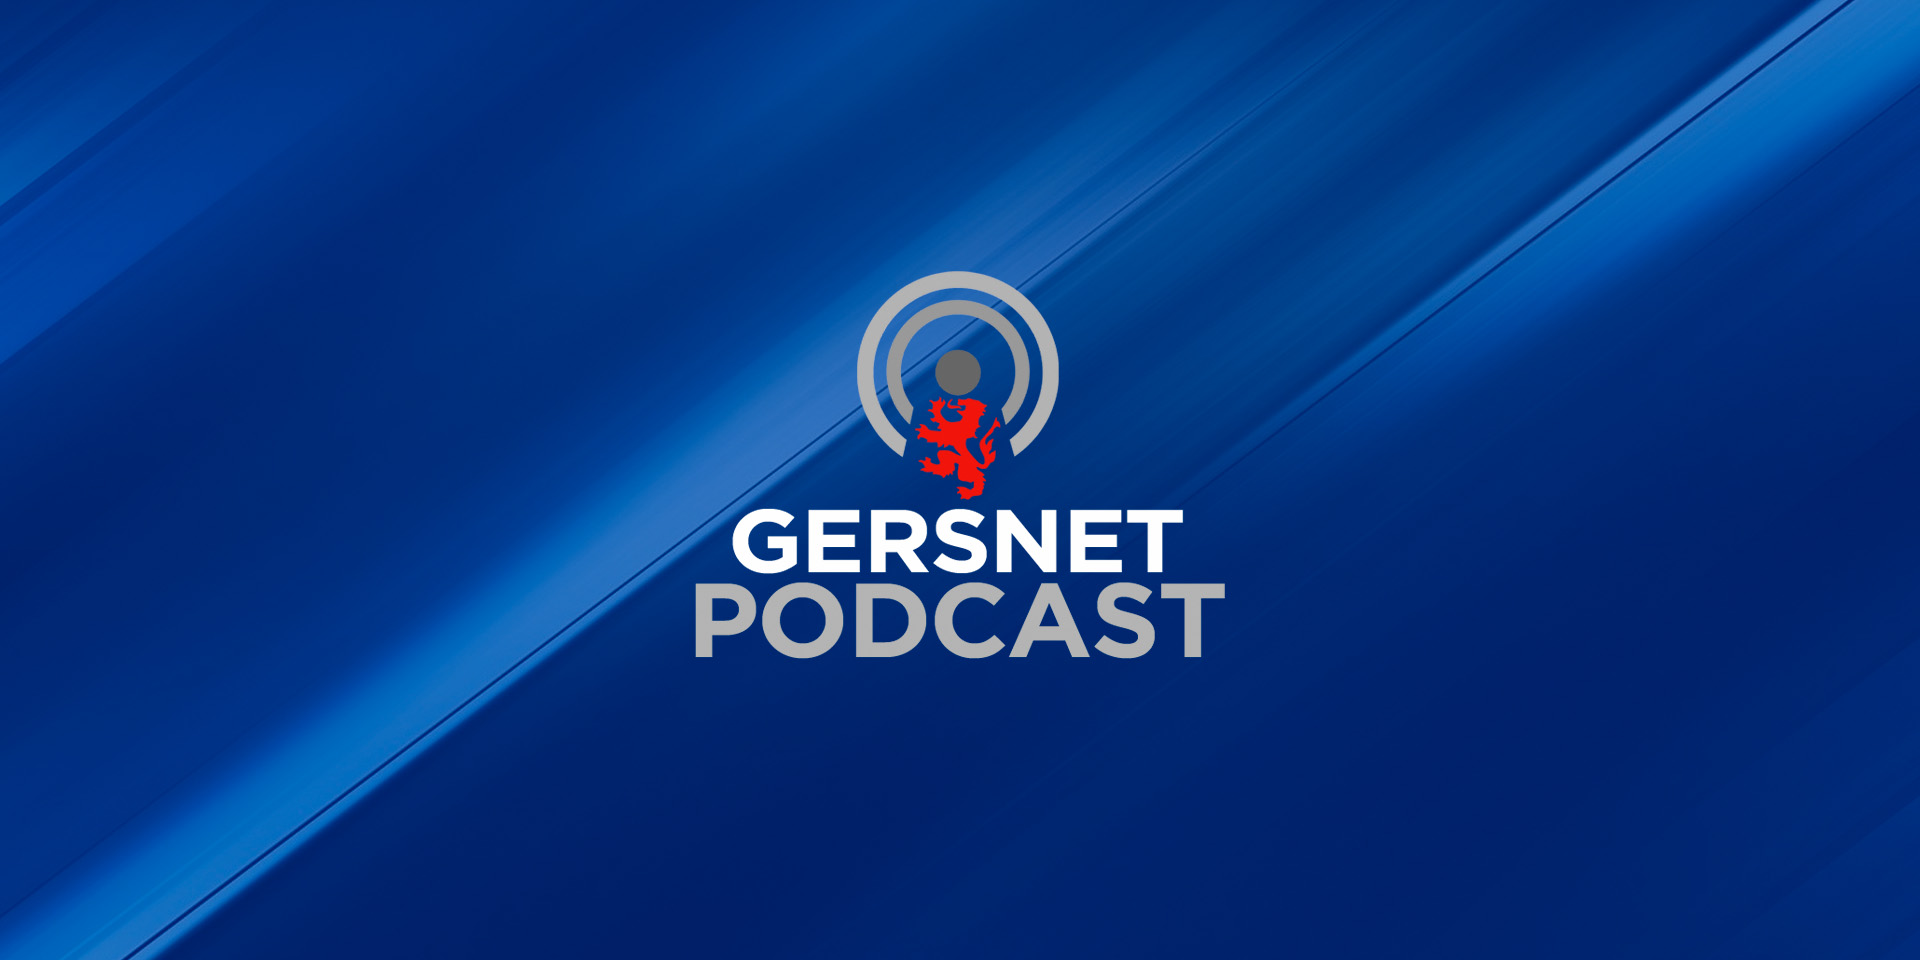 Gersnet Podcast 285 - Pass marks in Perth?